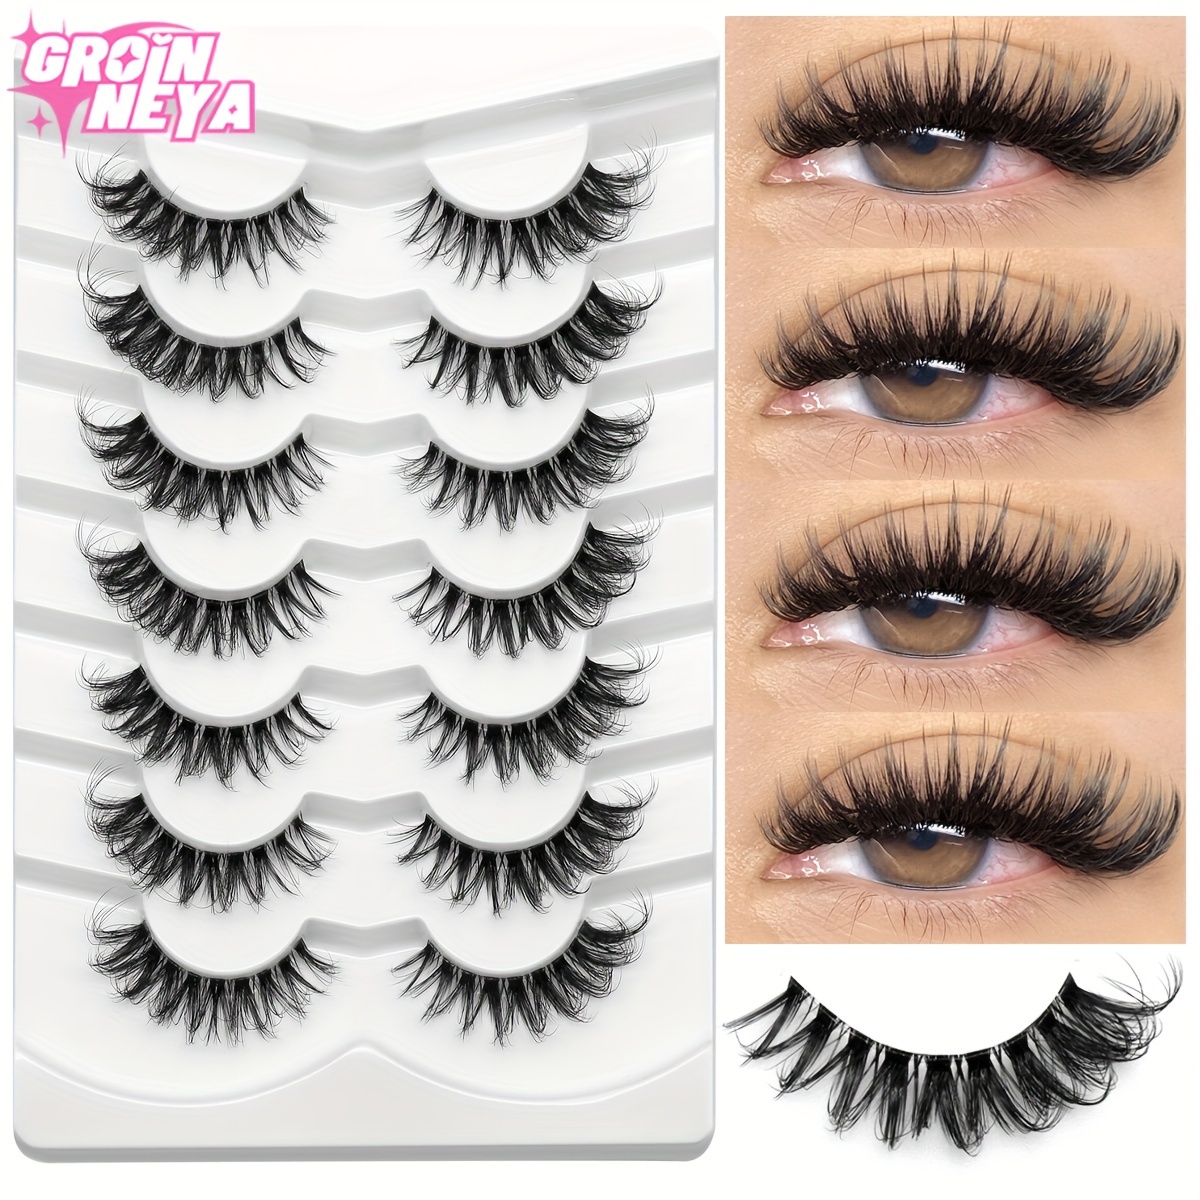 

Groinneya Luxe Wispy Mink Eyelashes - 5/7 Pairs, Invisible Band, Natural Look Extensions, Soft & Fluffy, Reusable, C-, 16-18mm